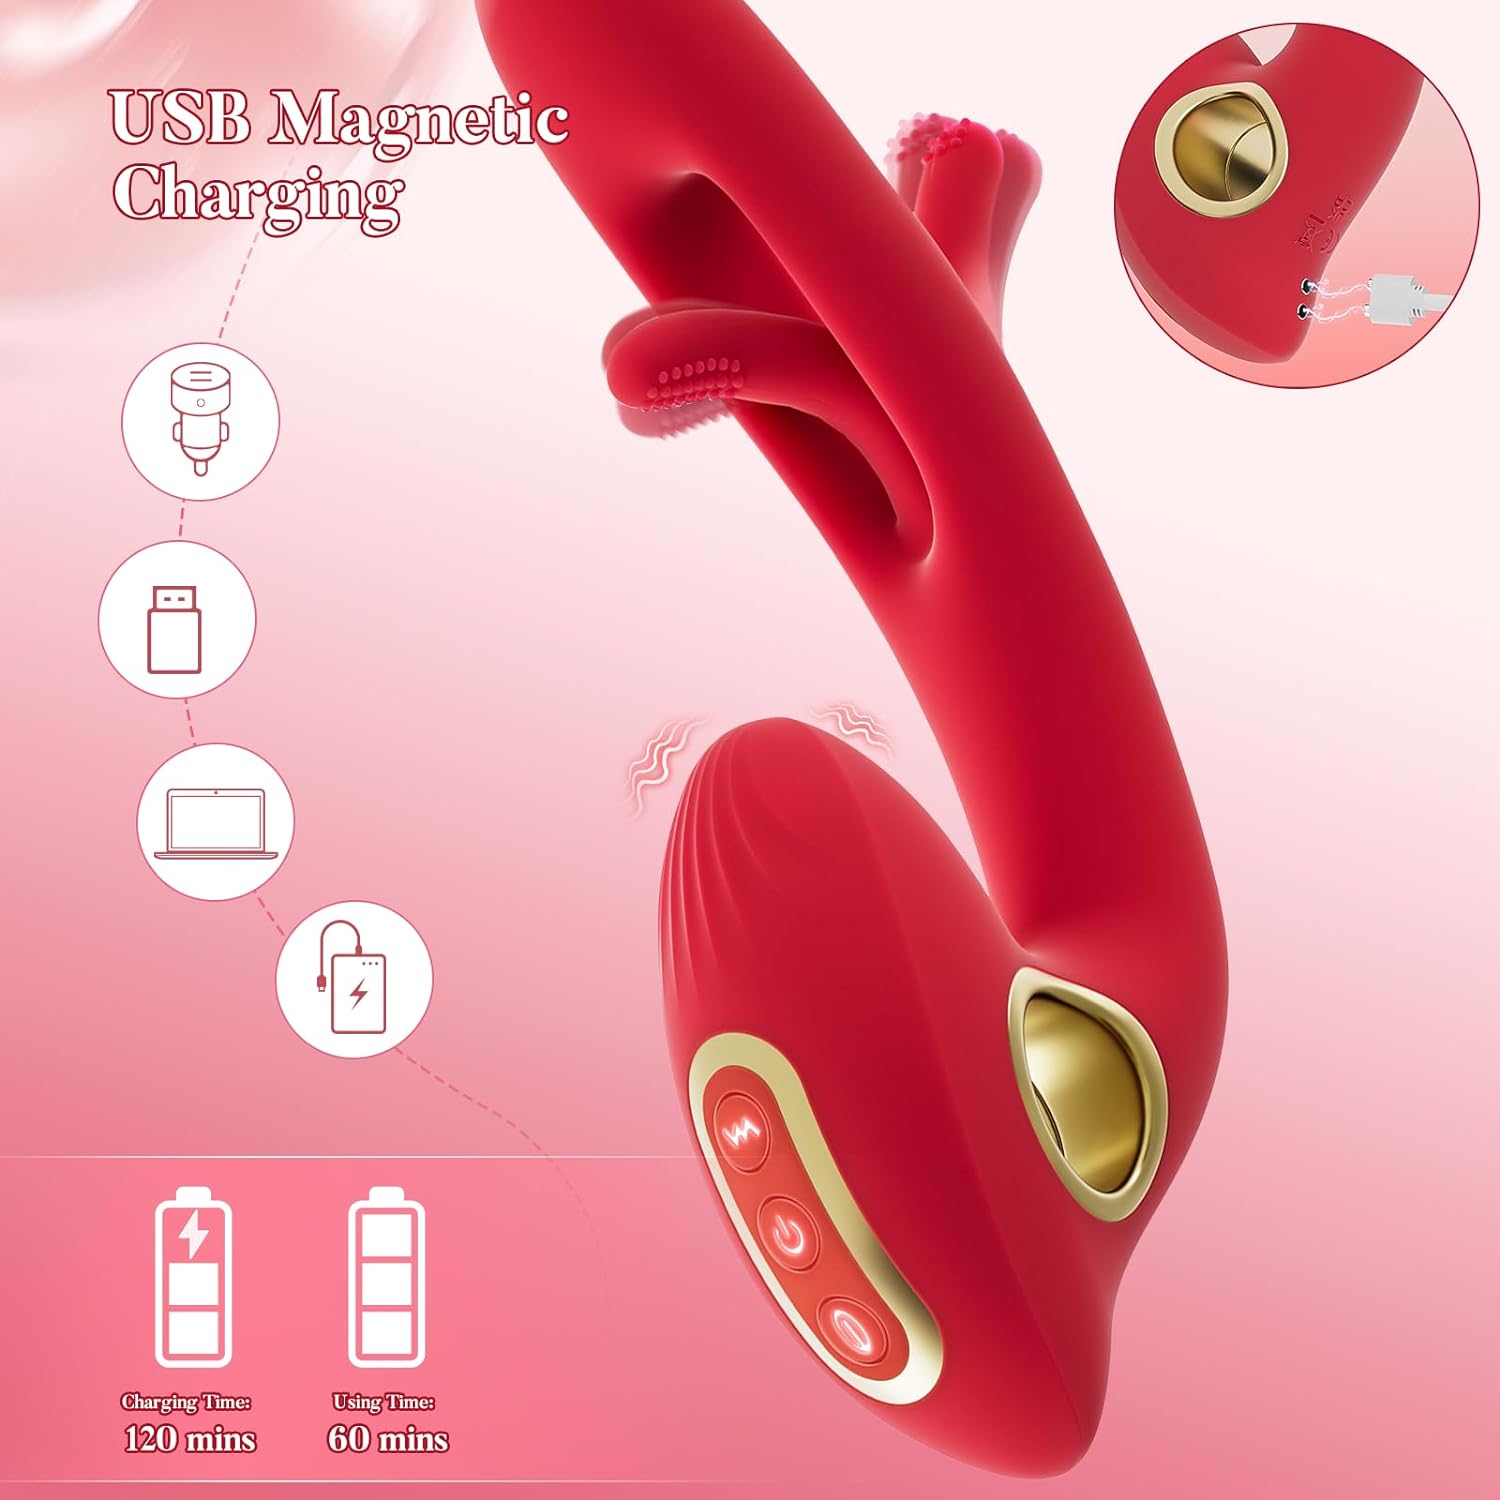 Amara - G Spot Flapping Vibrator with Clitoral Gentle Vibrating Function